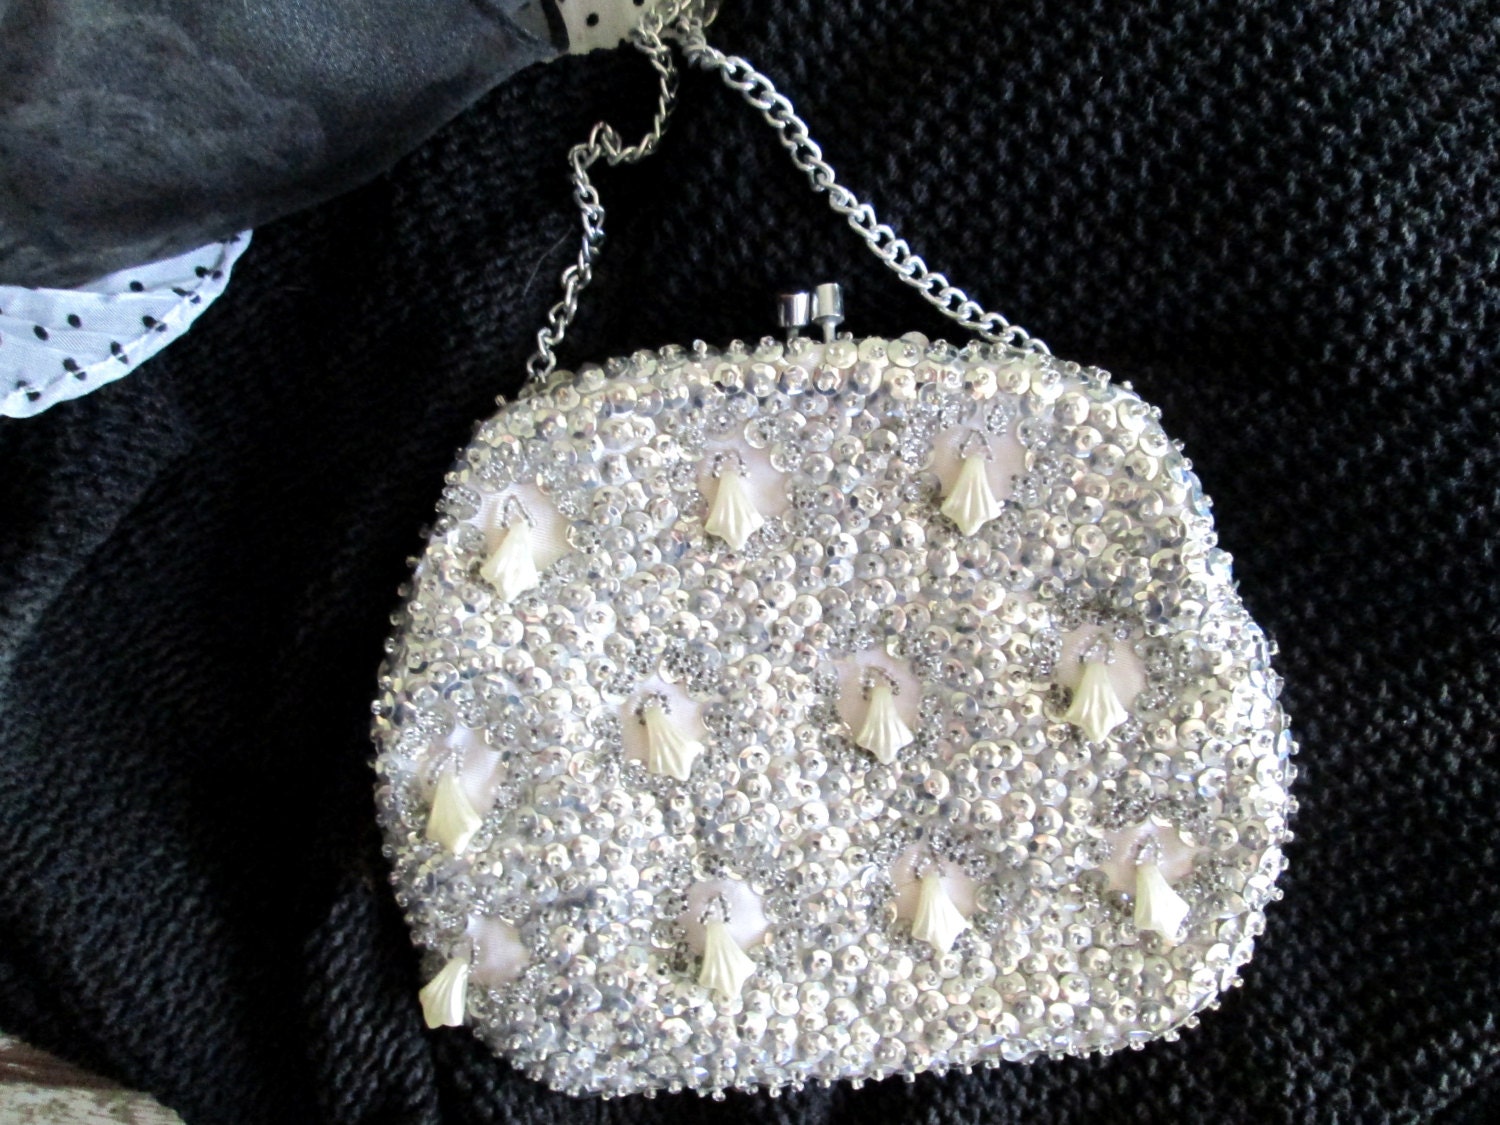 Vintage Beaded Sequined Evening Bag Silver and Antique White - Etsy